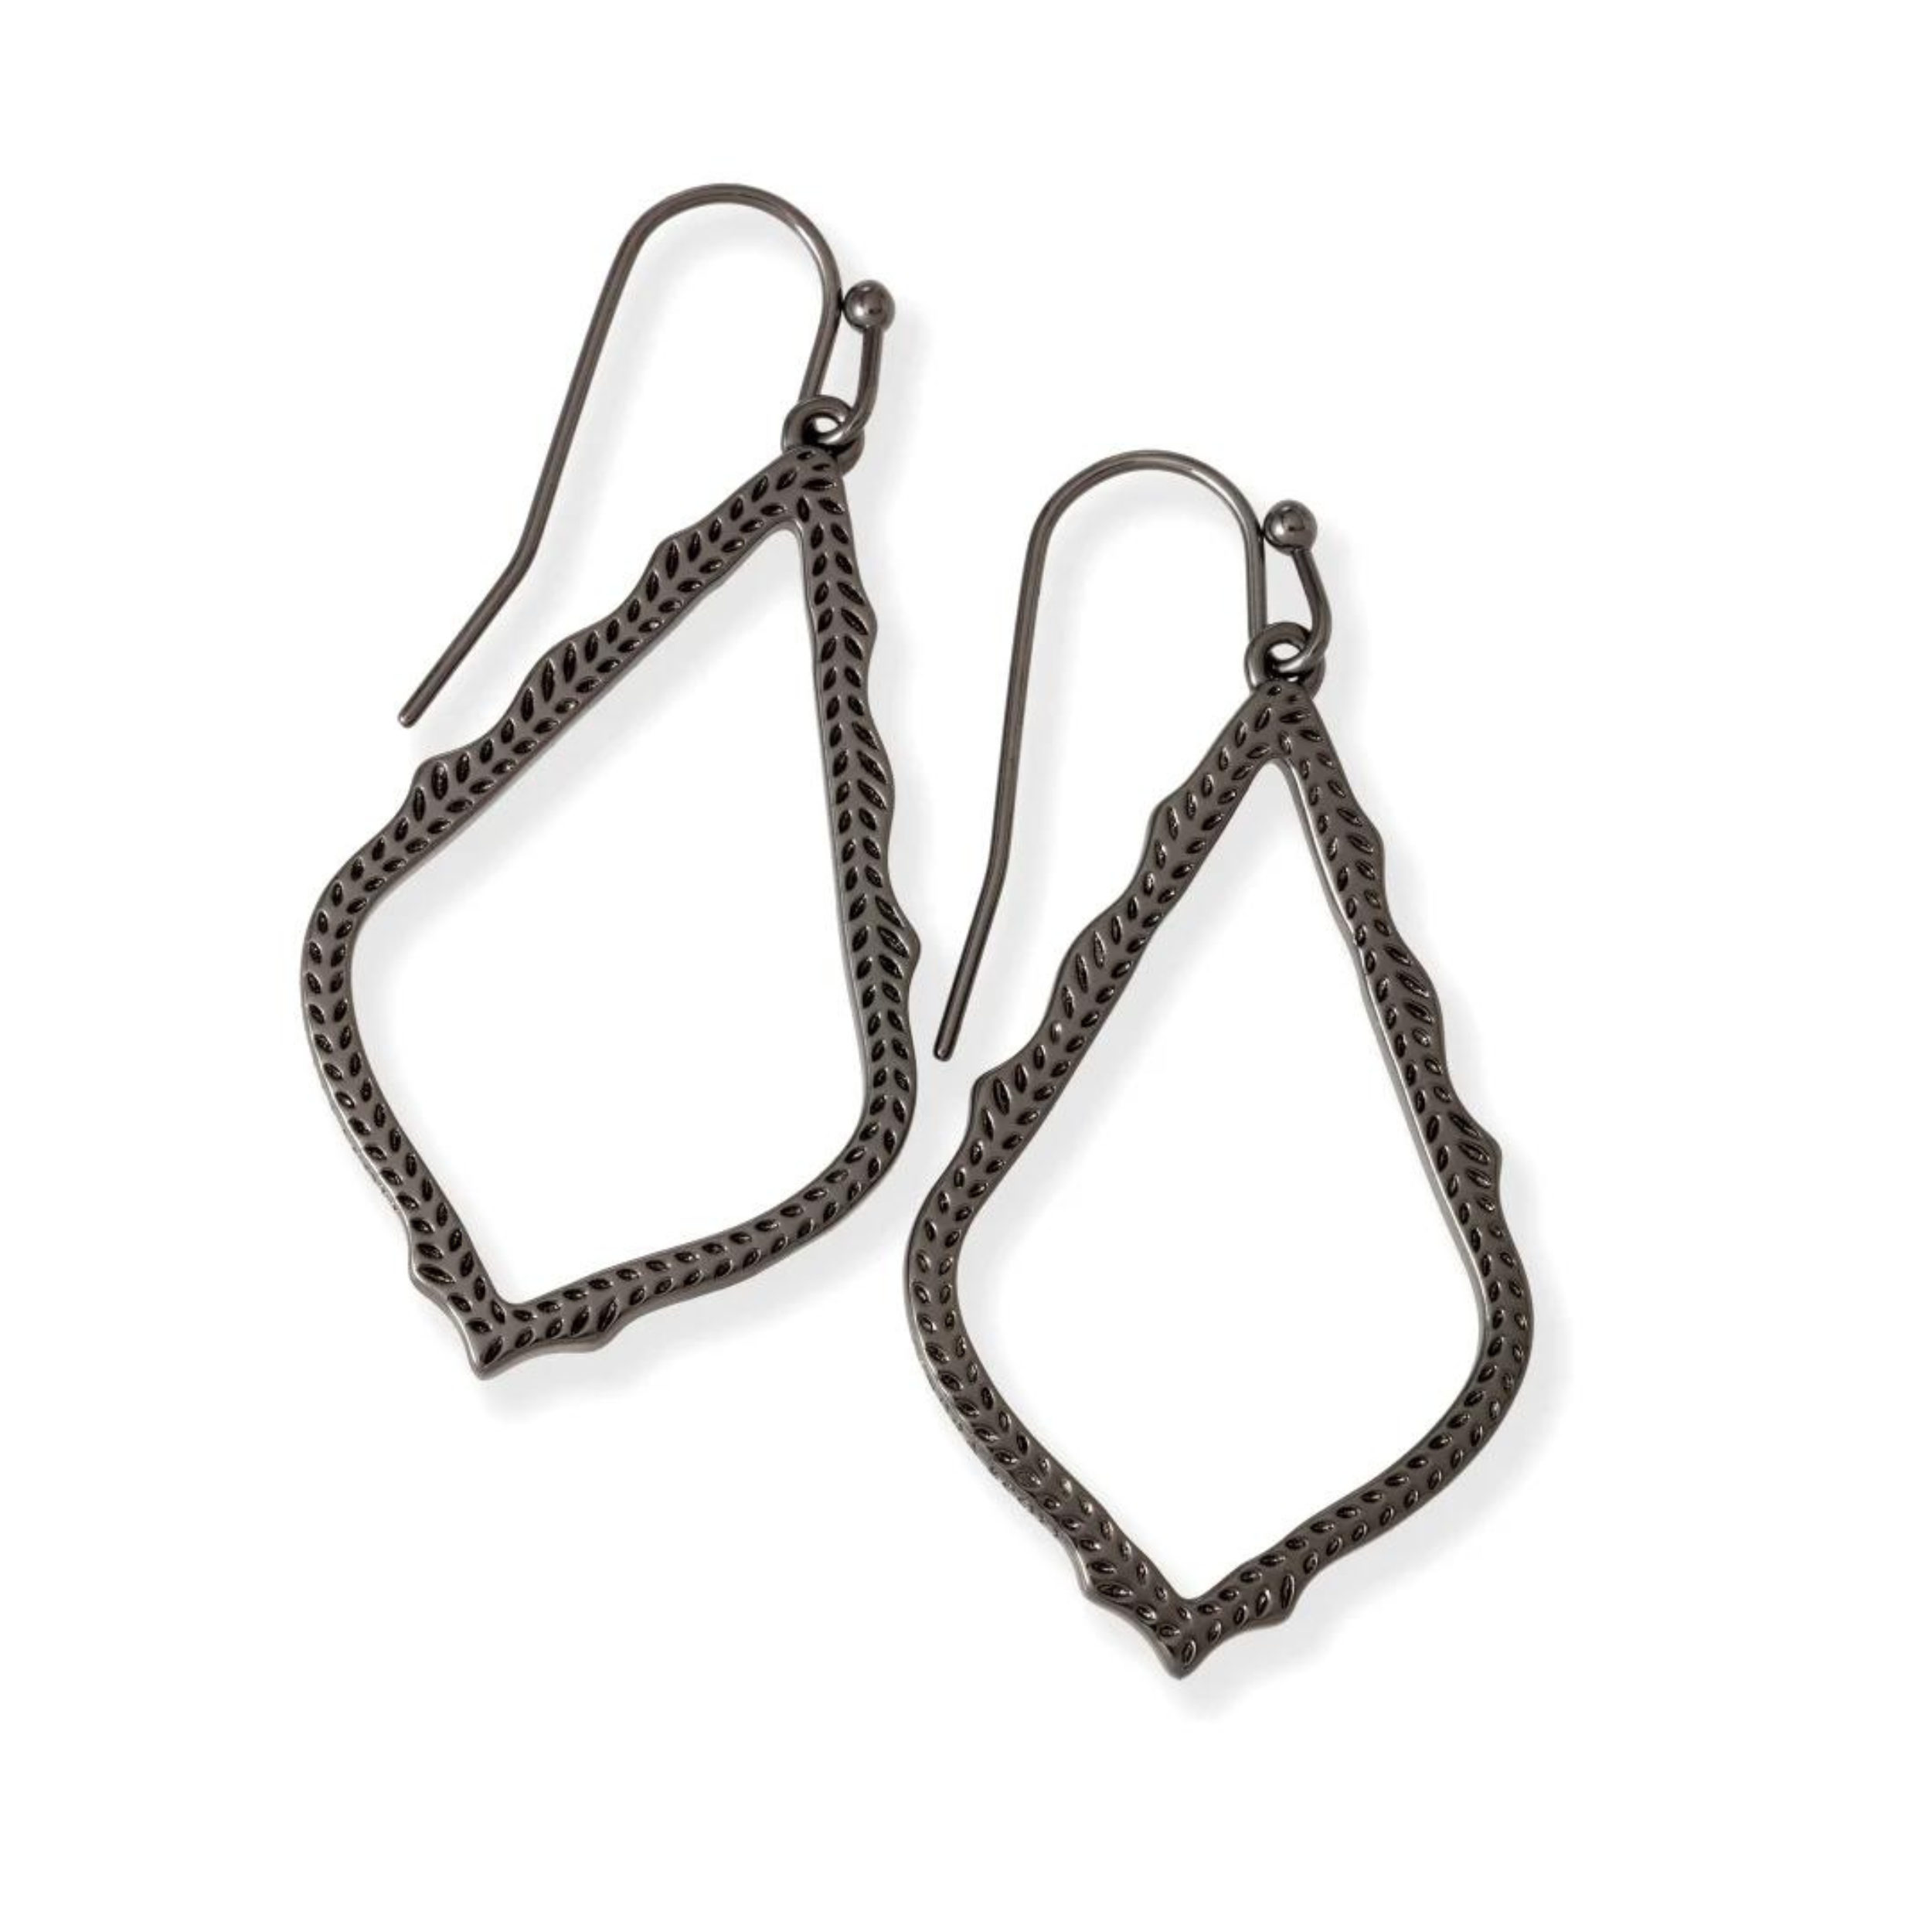 Gunmetal dangle earrings, pictured on a white background.